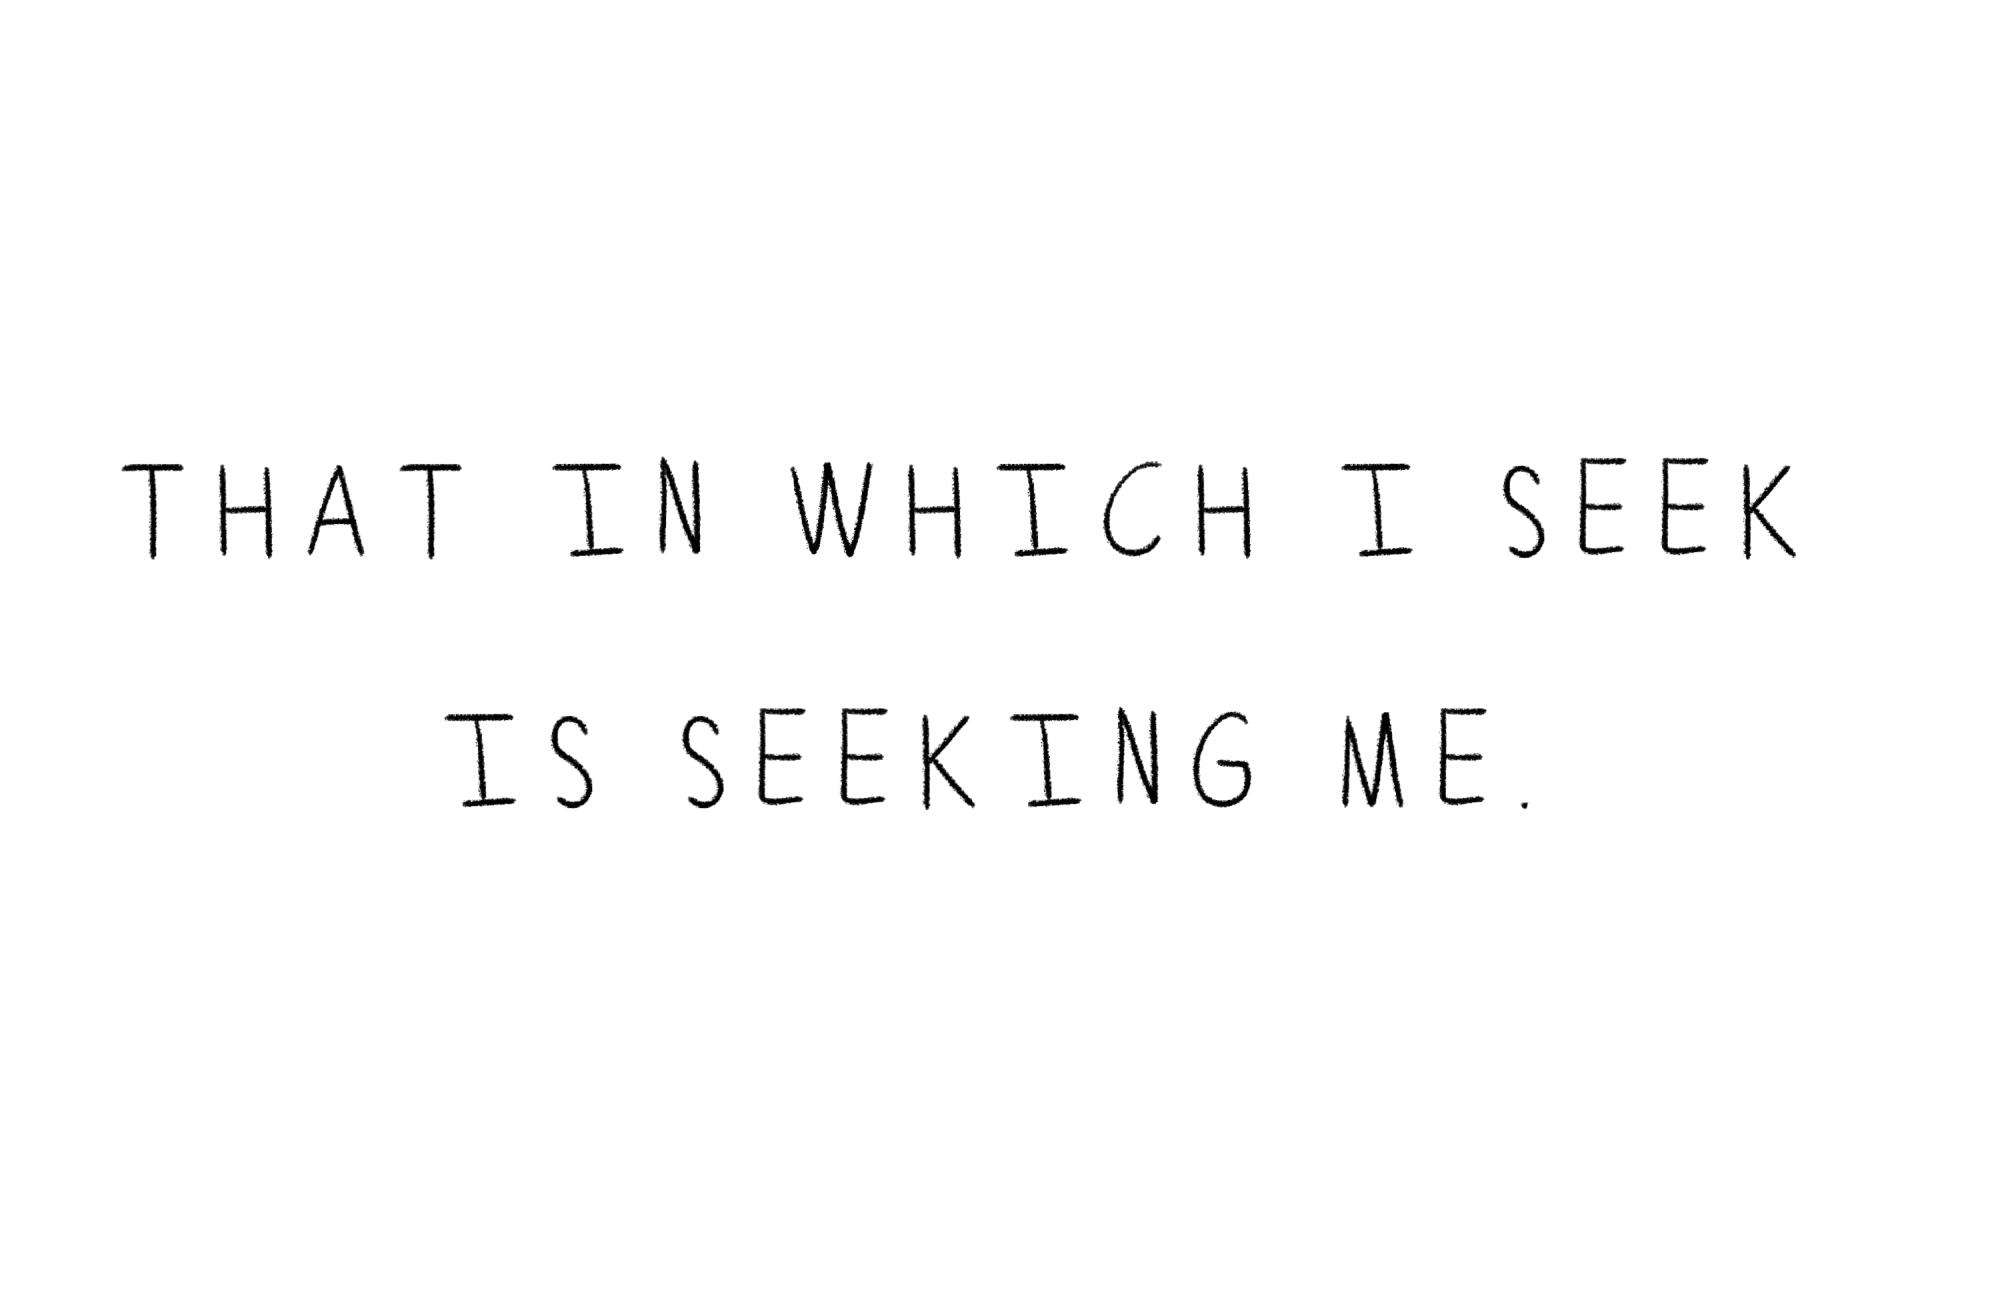 mantra reading "That in which i seek is seeking me."